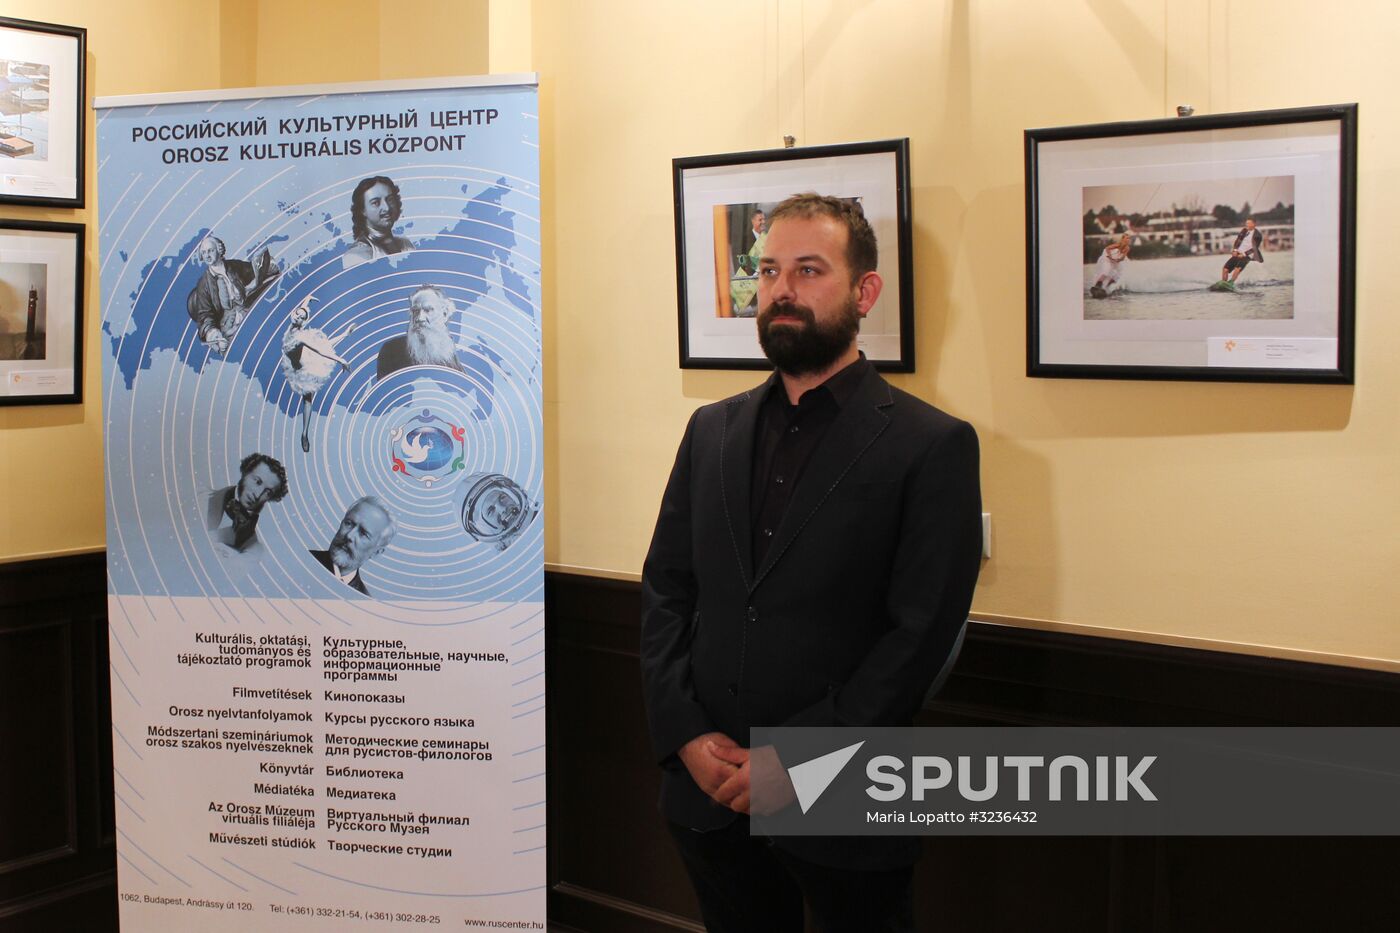 Opening of exhibition of works by winners of Andrei Stenin Press Photo Contest in Budapest